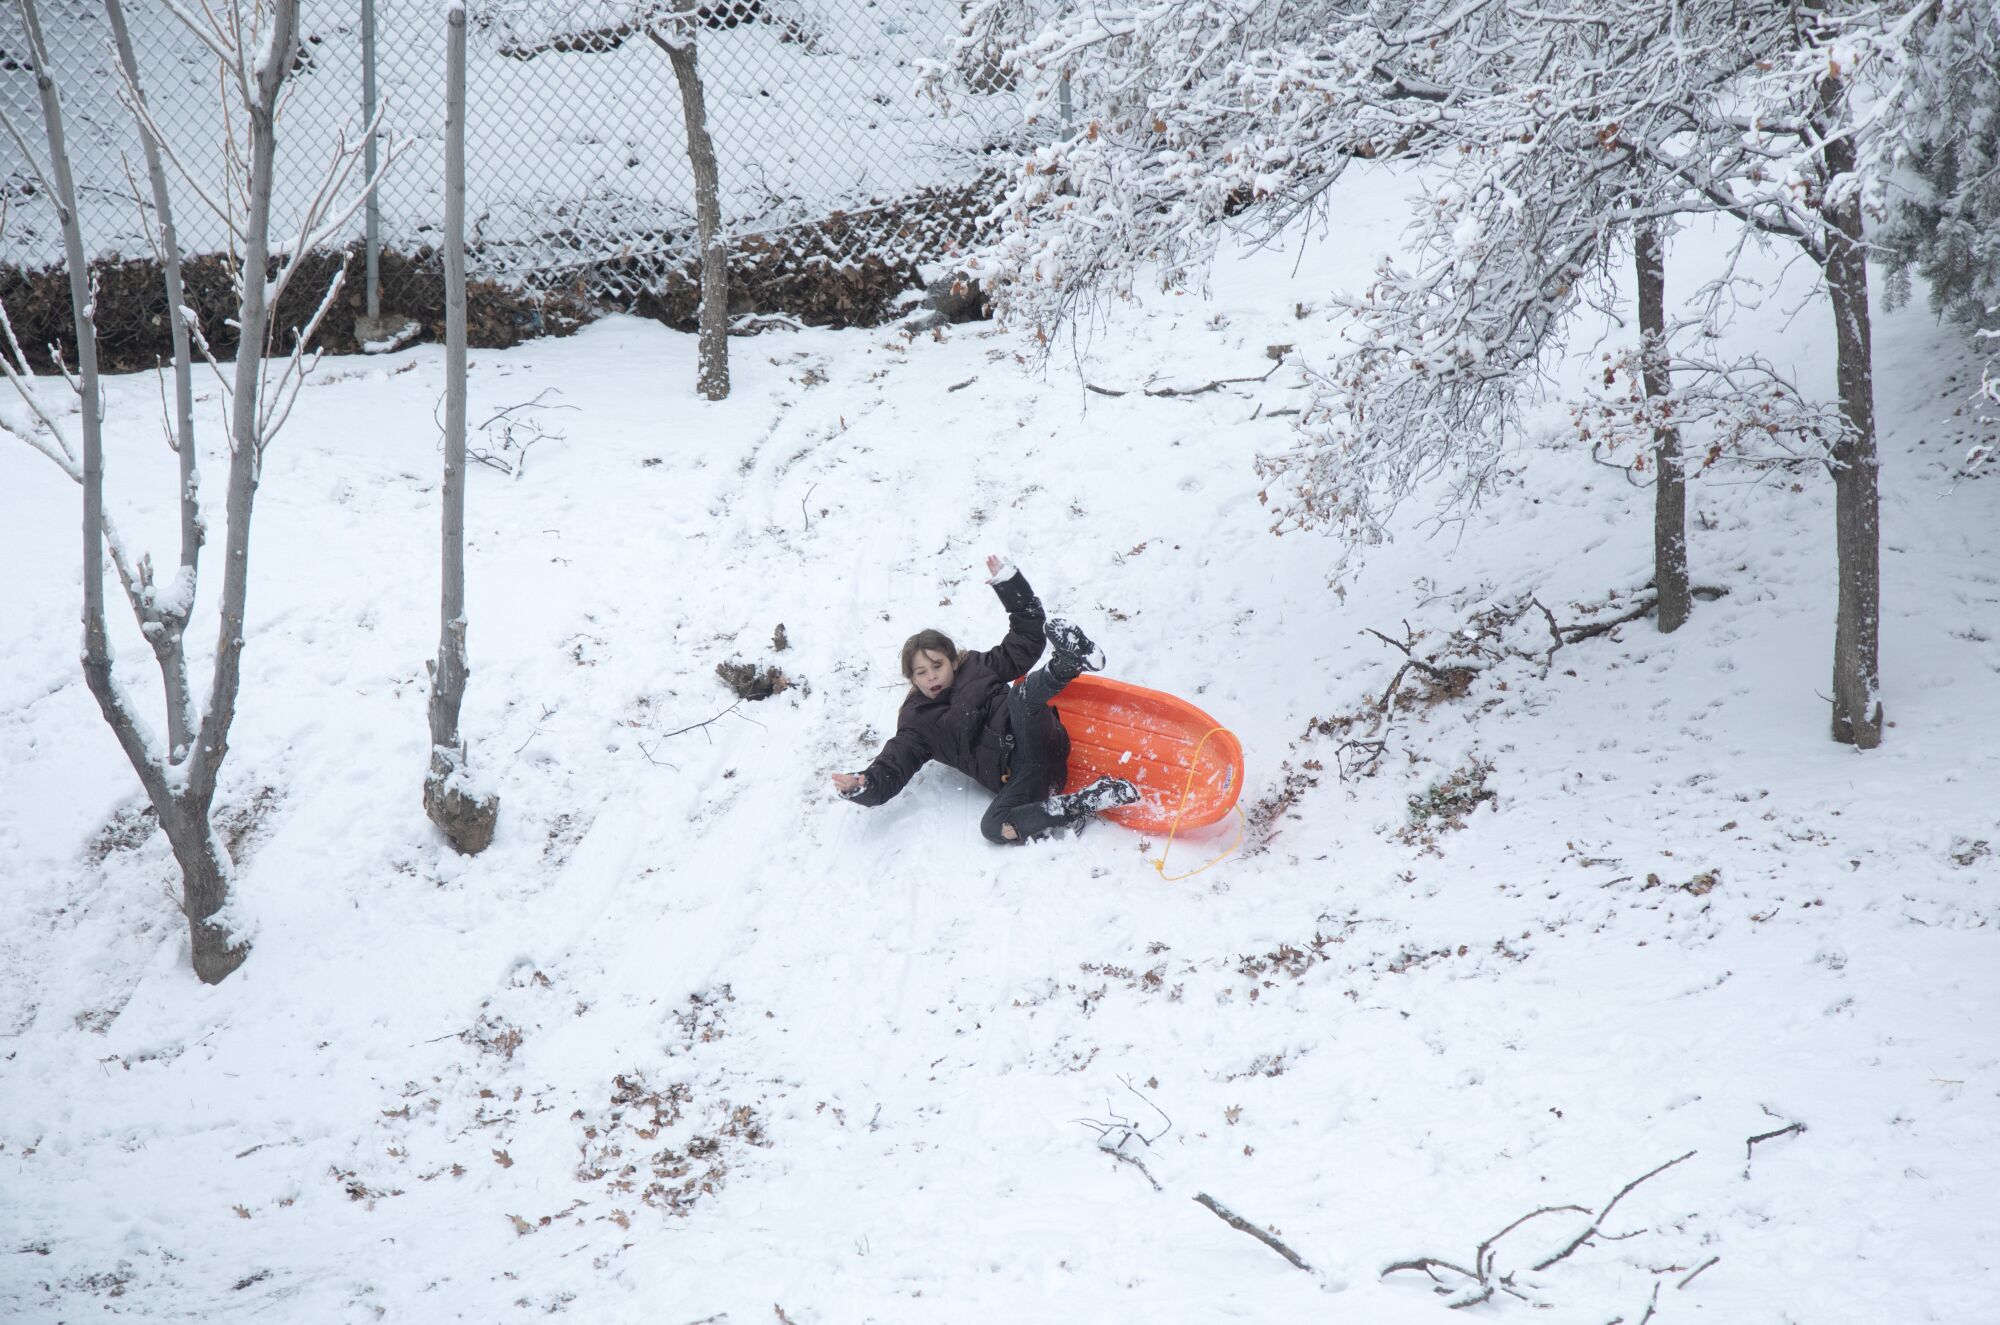 Hailey Long, 8, takes a tumble while sledding on a small hill at her home in Frazier Park.